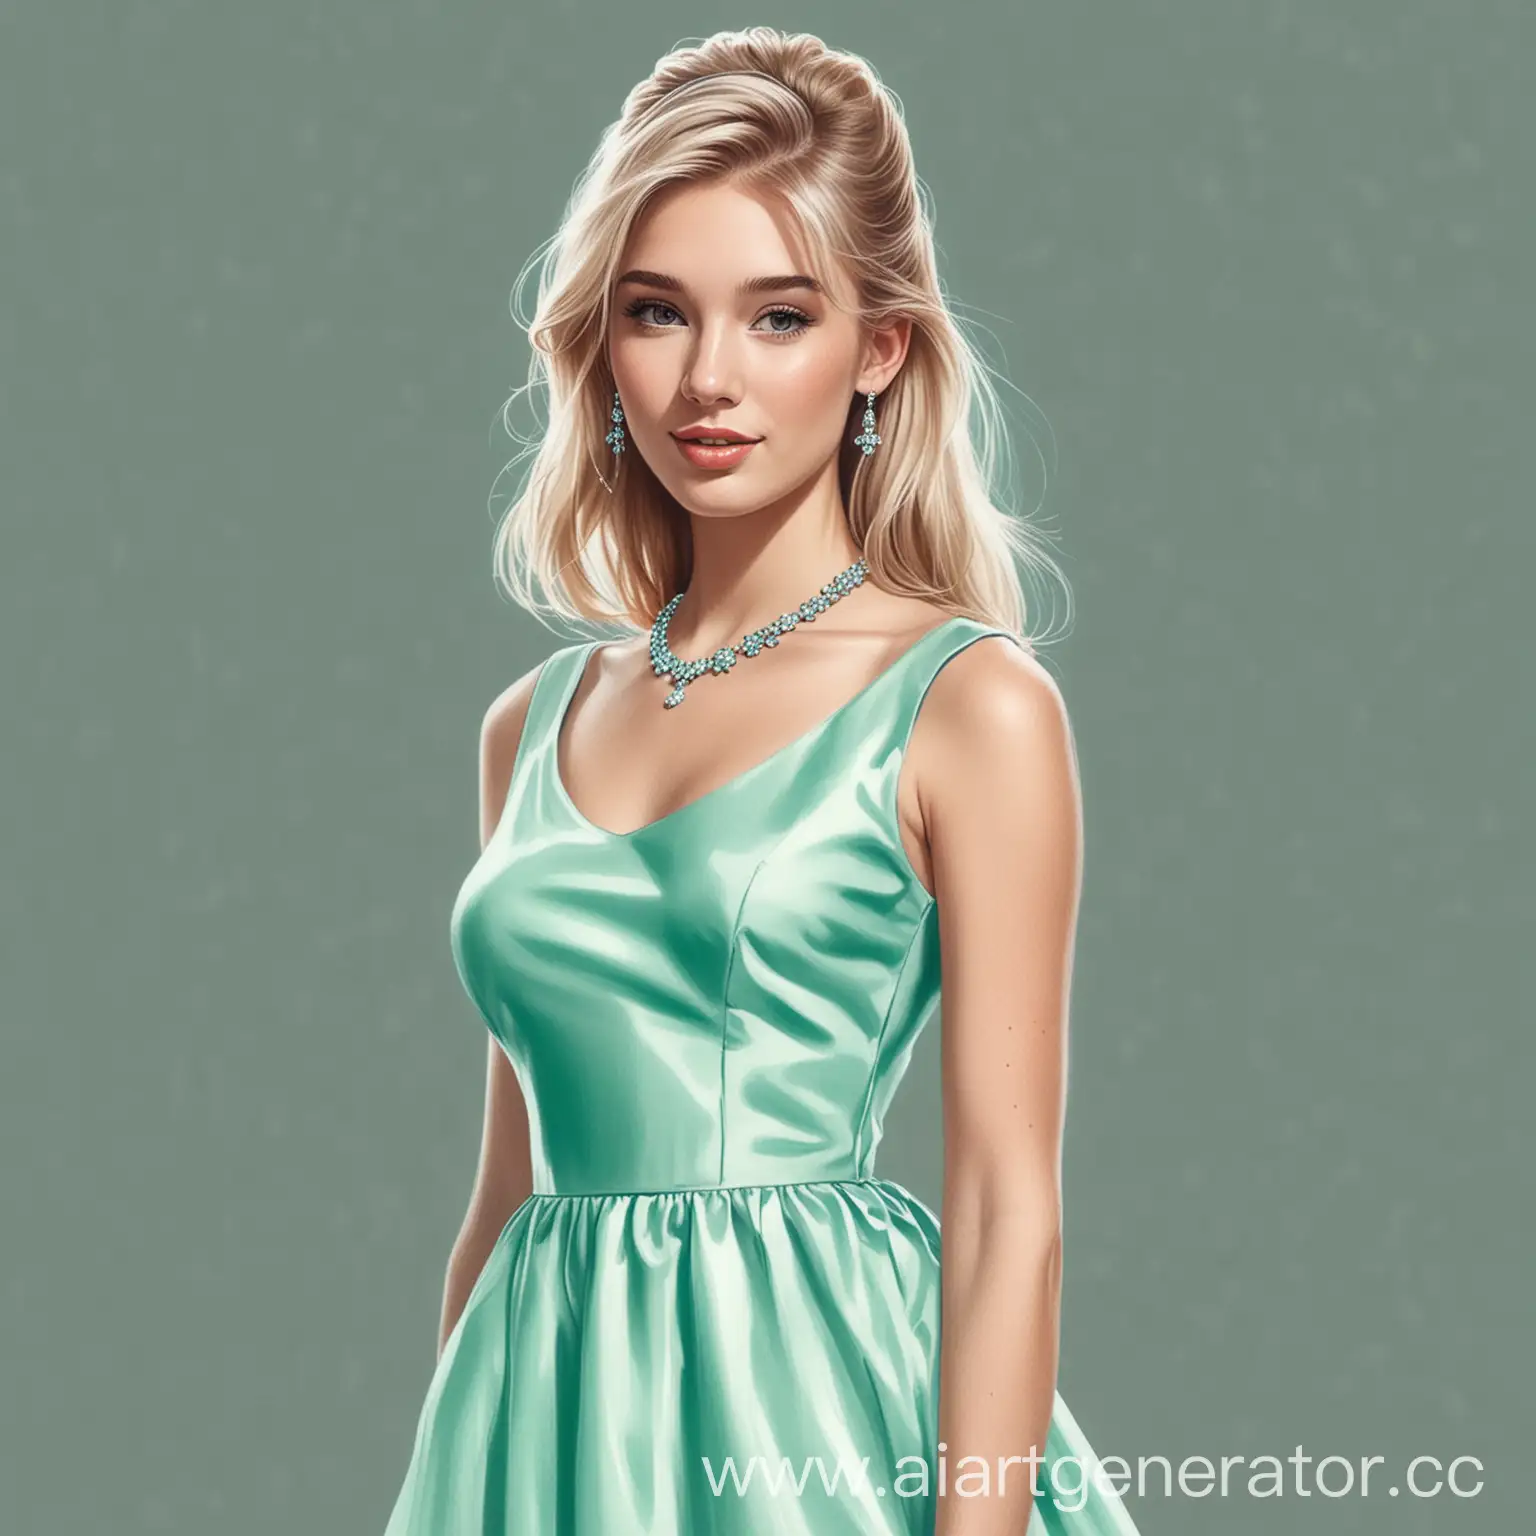 TiffanyCo-Brand-Representation-Girl-with-Light-Hair-in-Mint-Dress